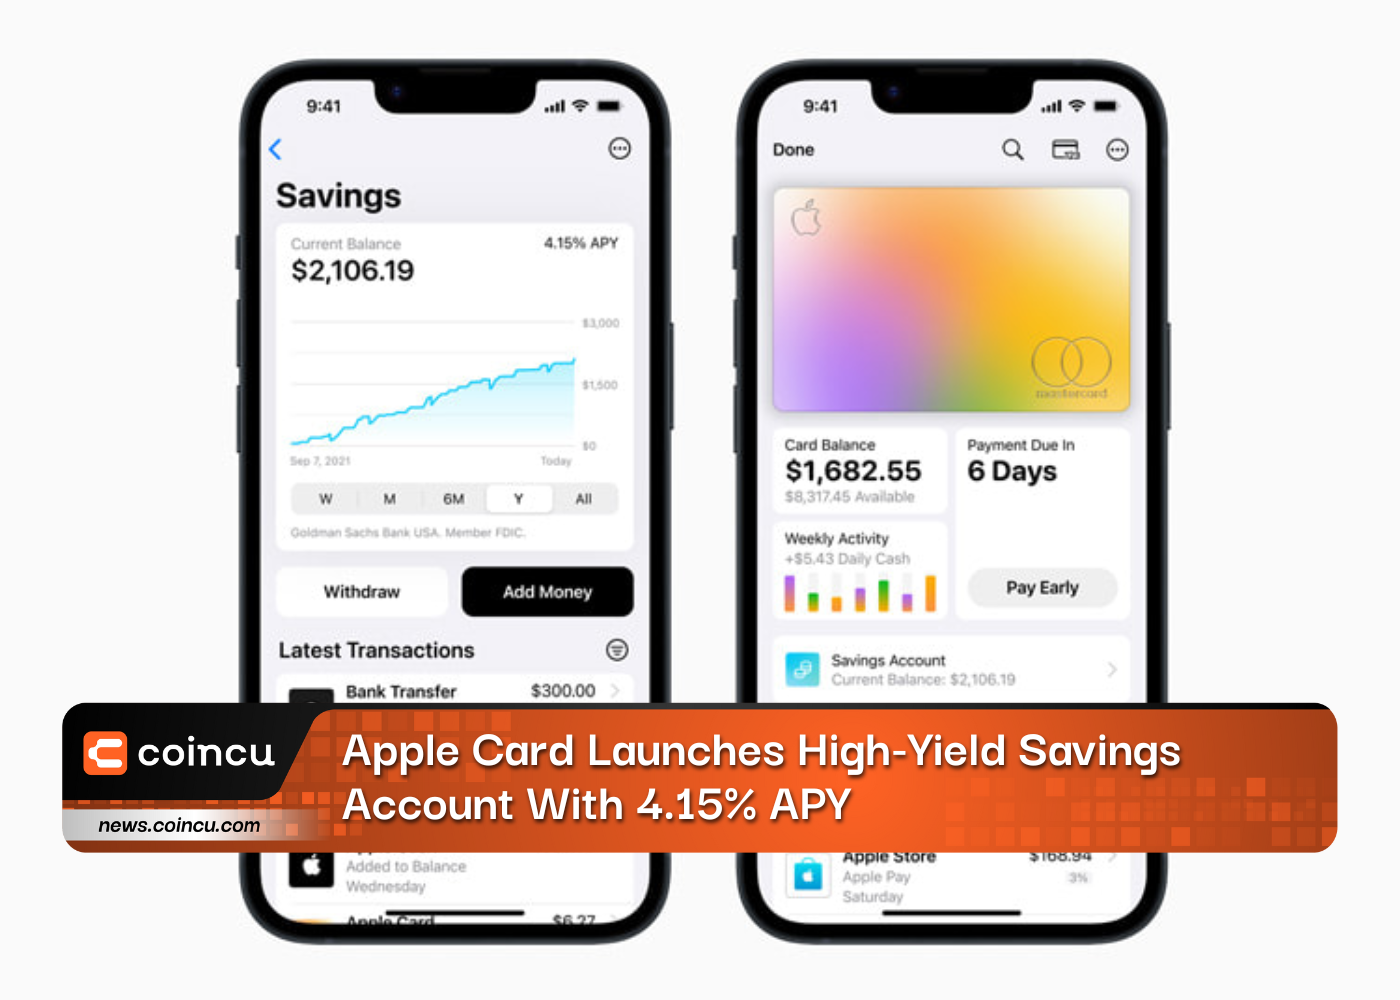 Apple Card Launches High-Yield Savings Account With 4.15% APY